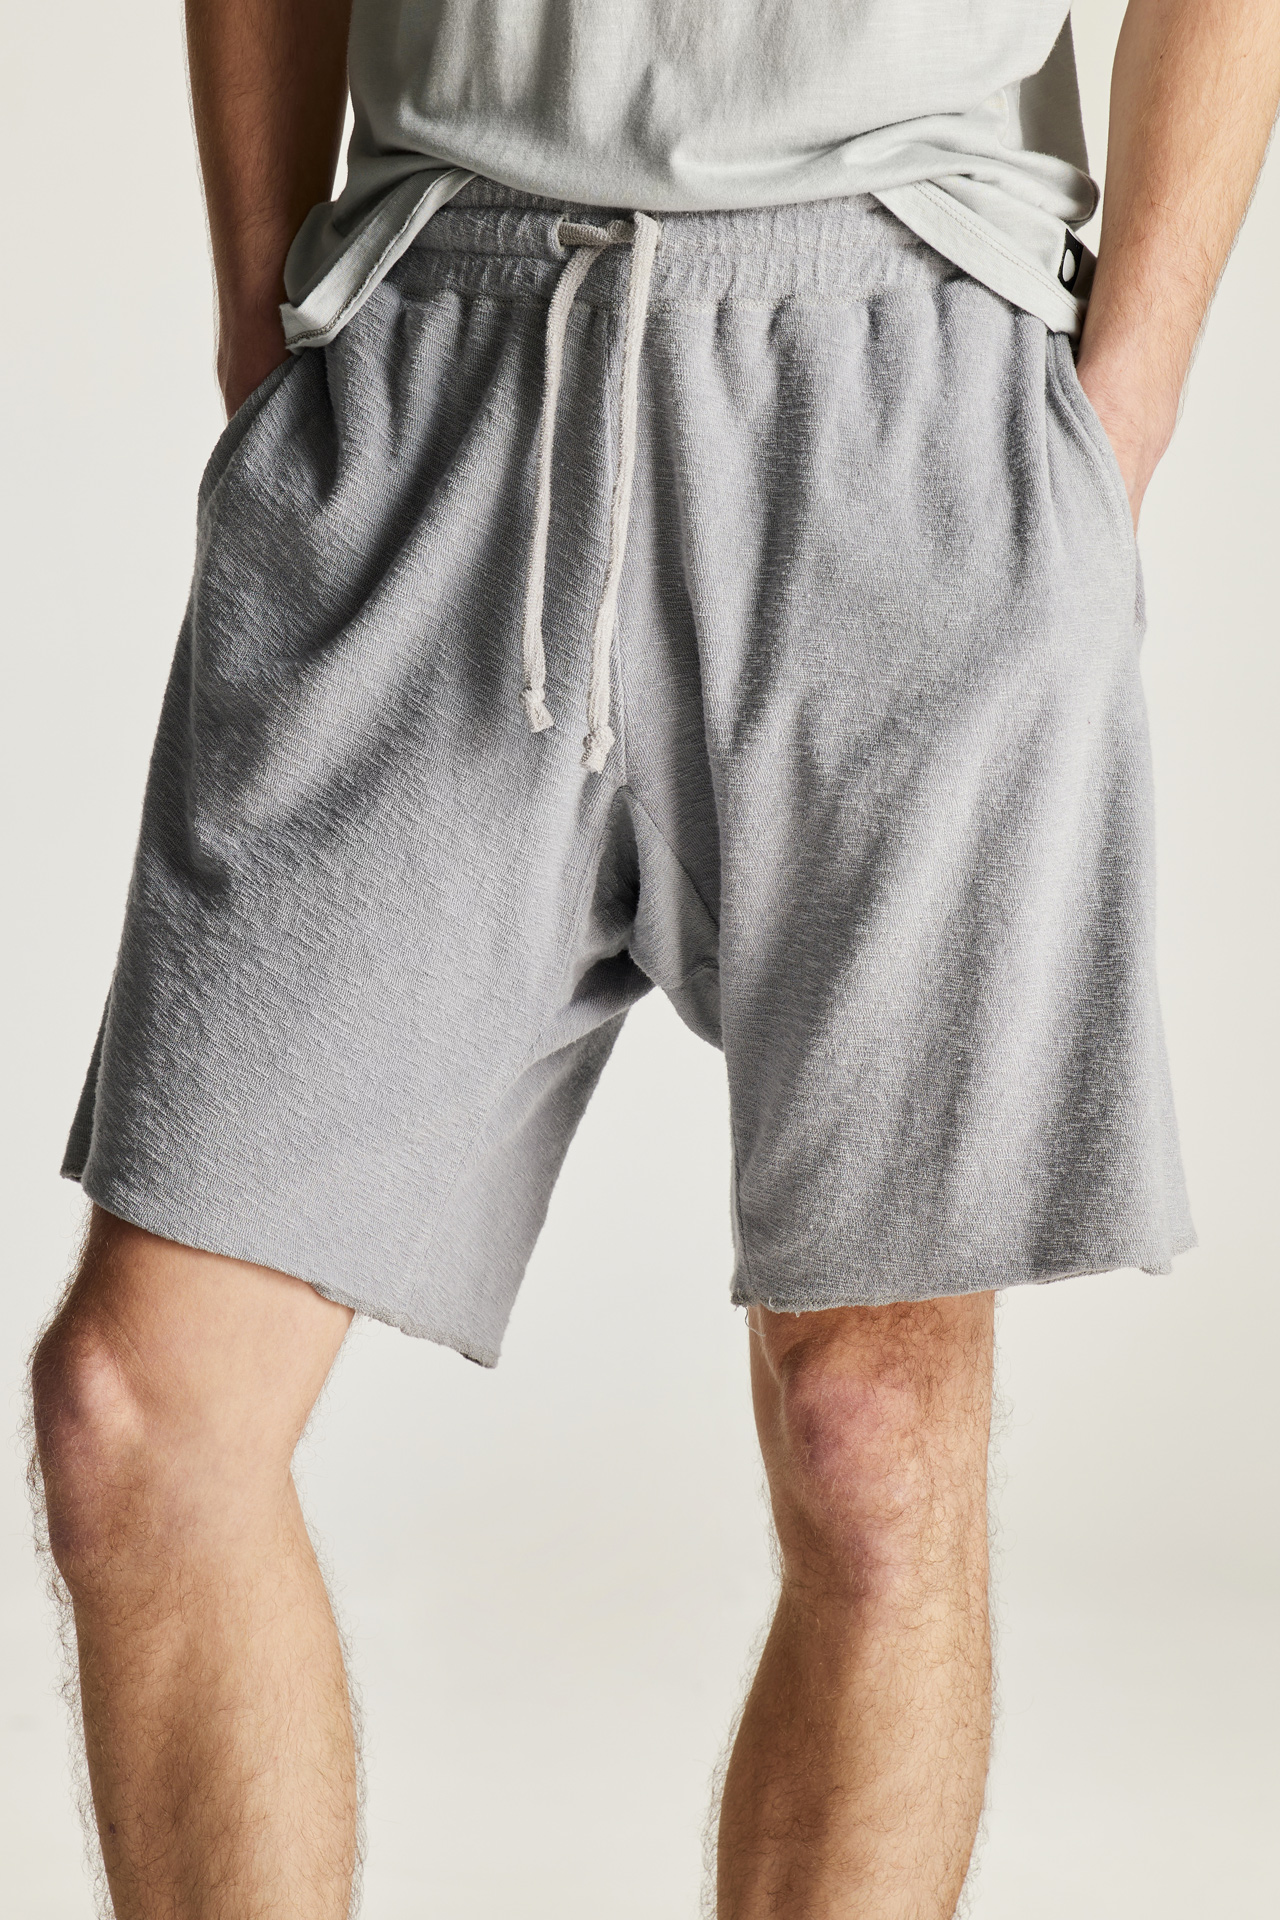 Terry Towel Relaxed Fit Bermuda